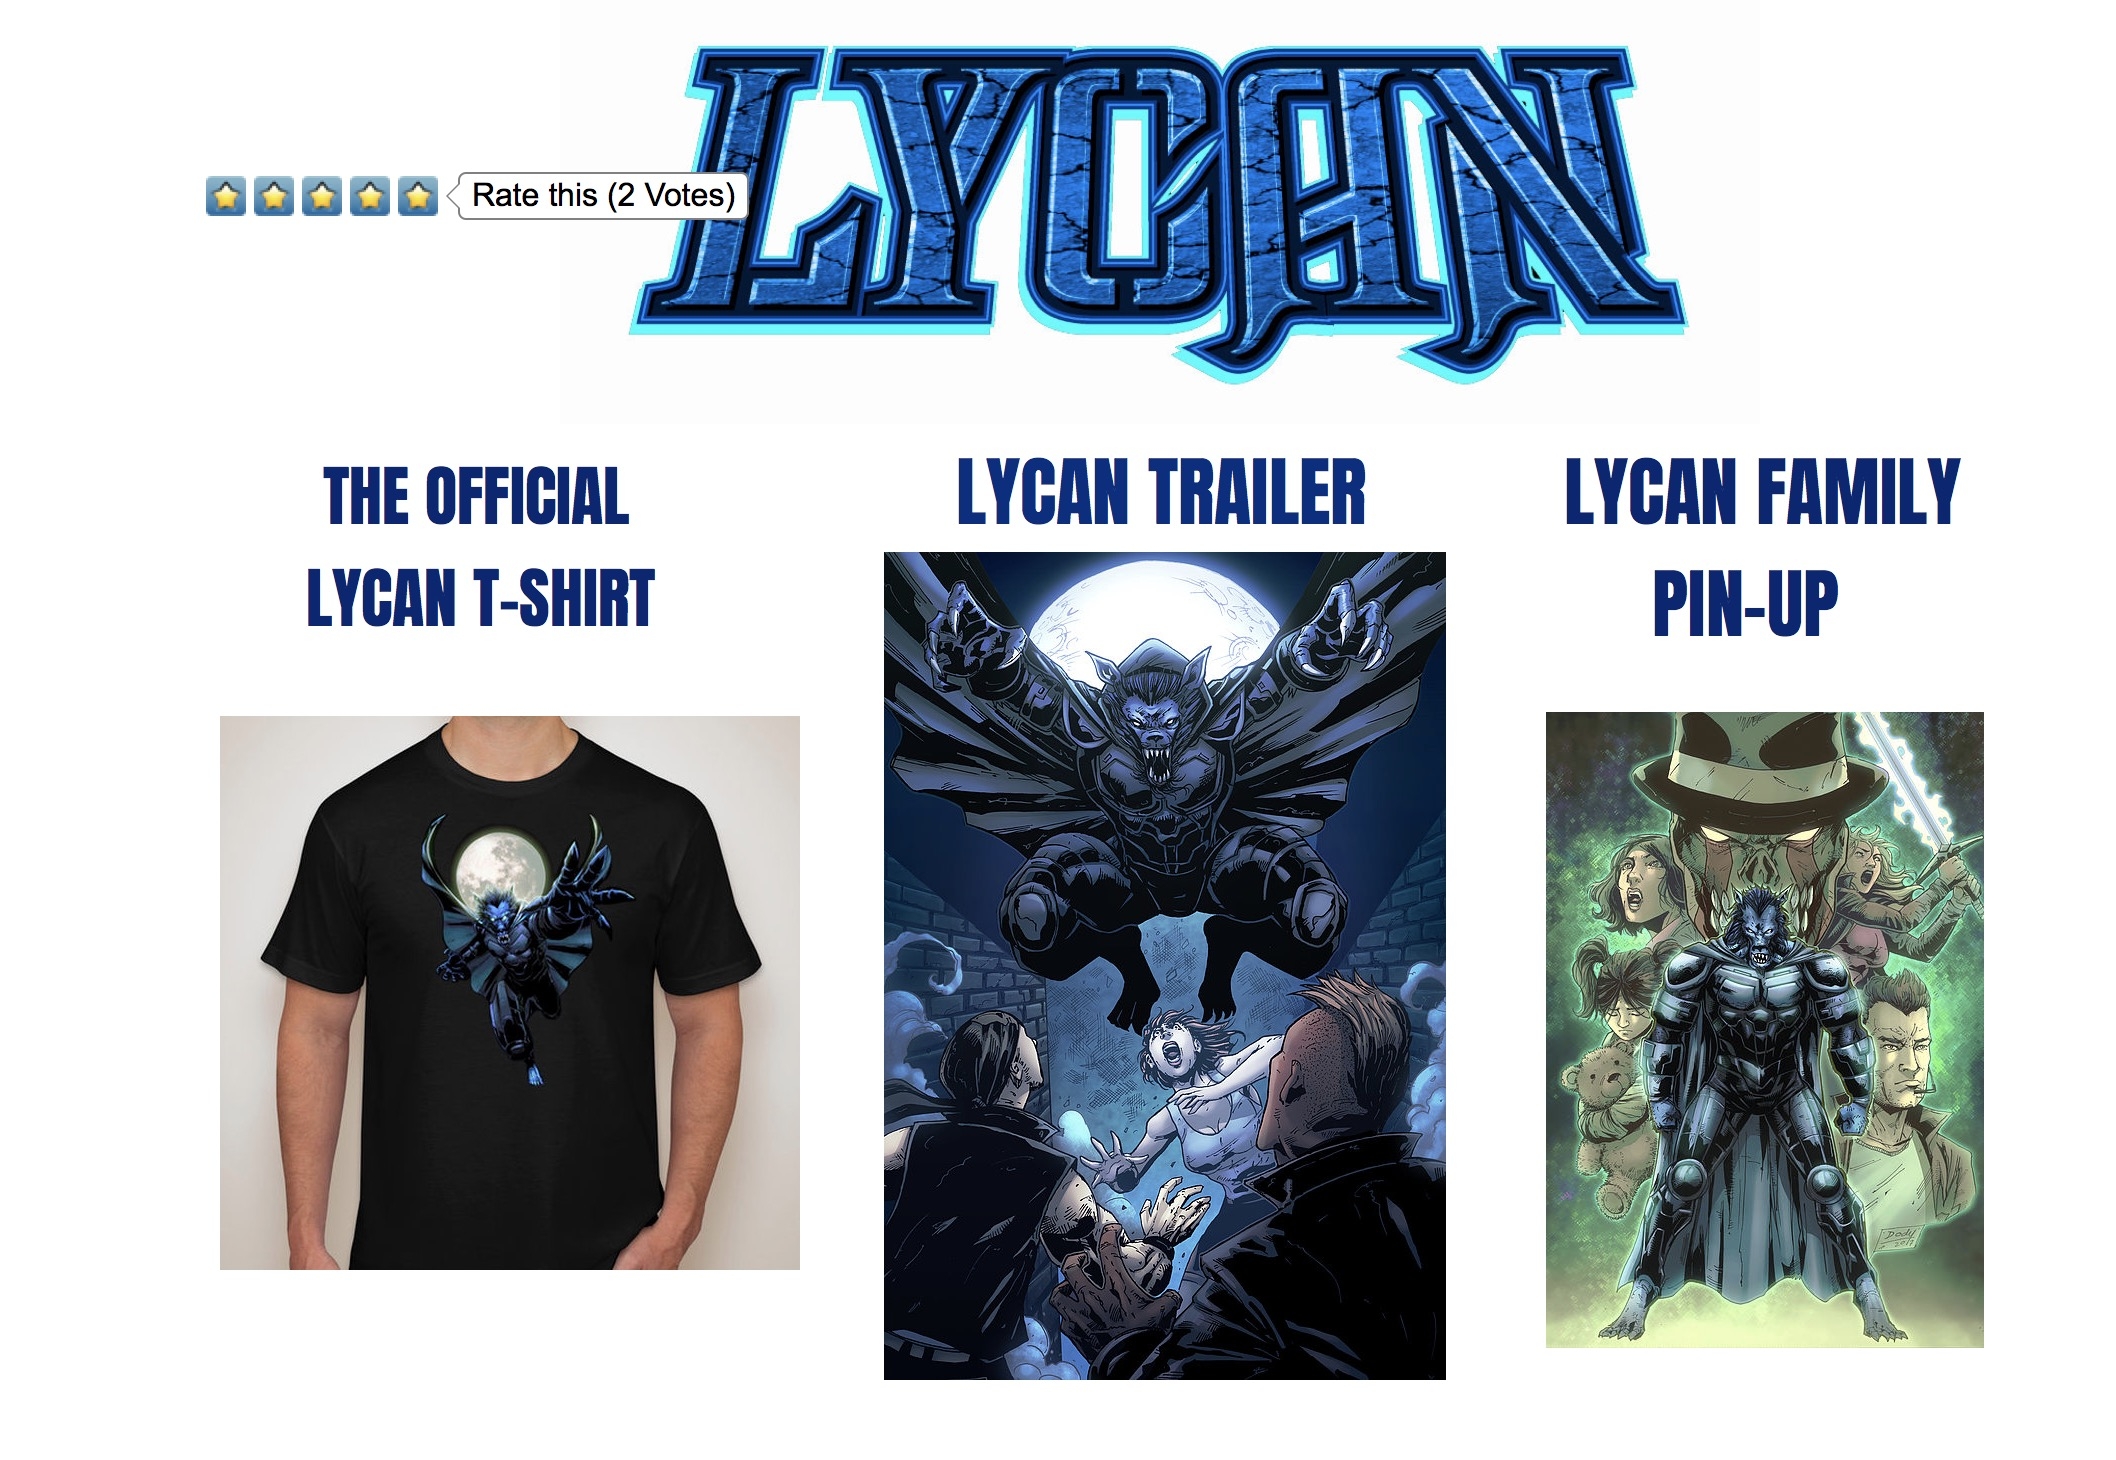 See All things LYCAN by Visiting Shadow Press